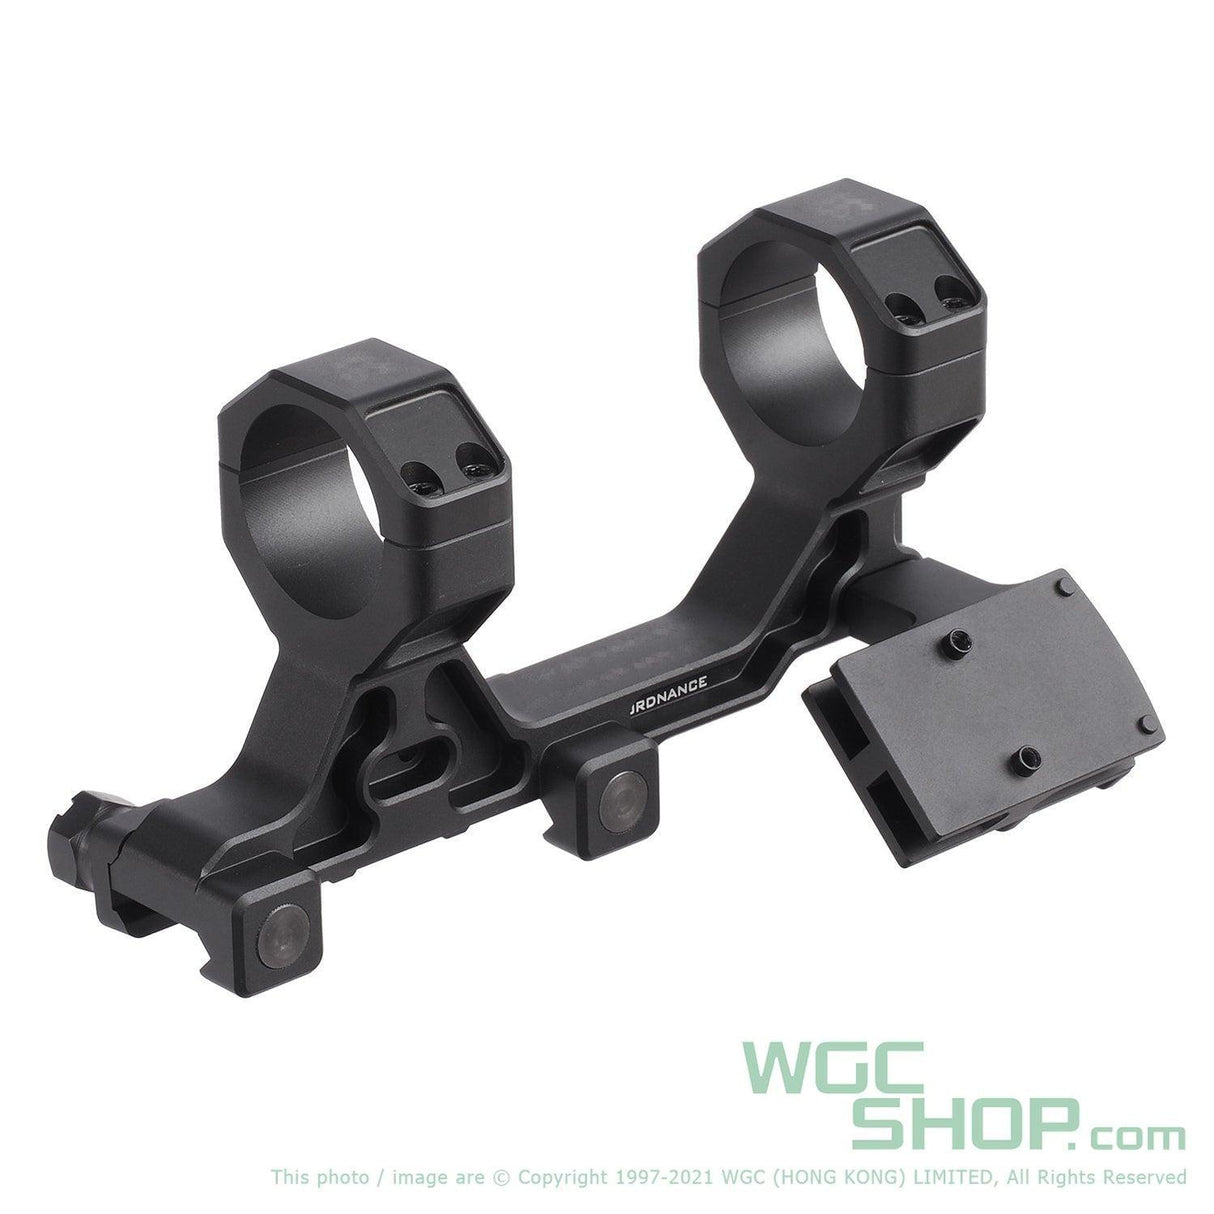 AIRSOFT ARTISAN BO Style 30mm Modular Mount for Mil-spec 1913 Rail System with RMR Adapter - WGC Shop